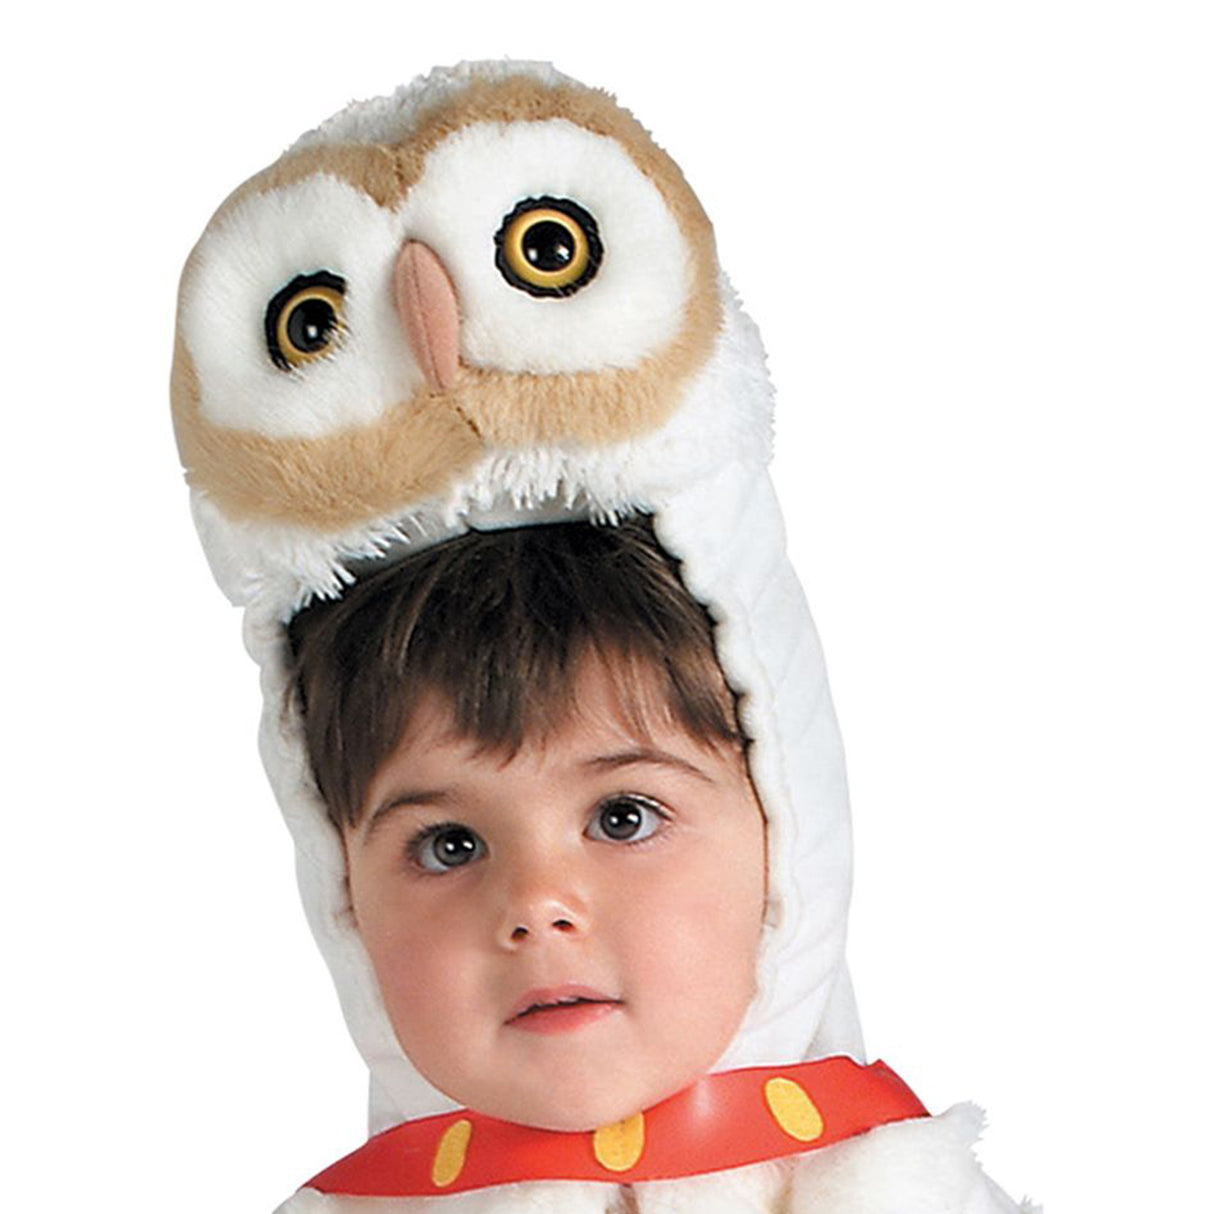 Rubies Hedwig The Owl Deluxe Costume, White (Small)